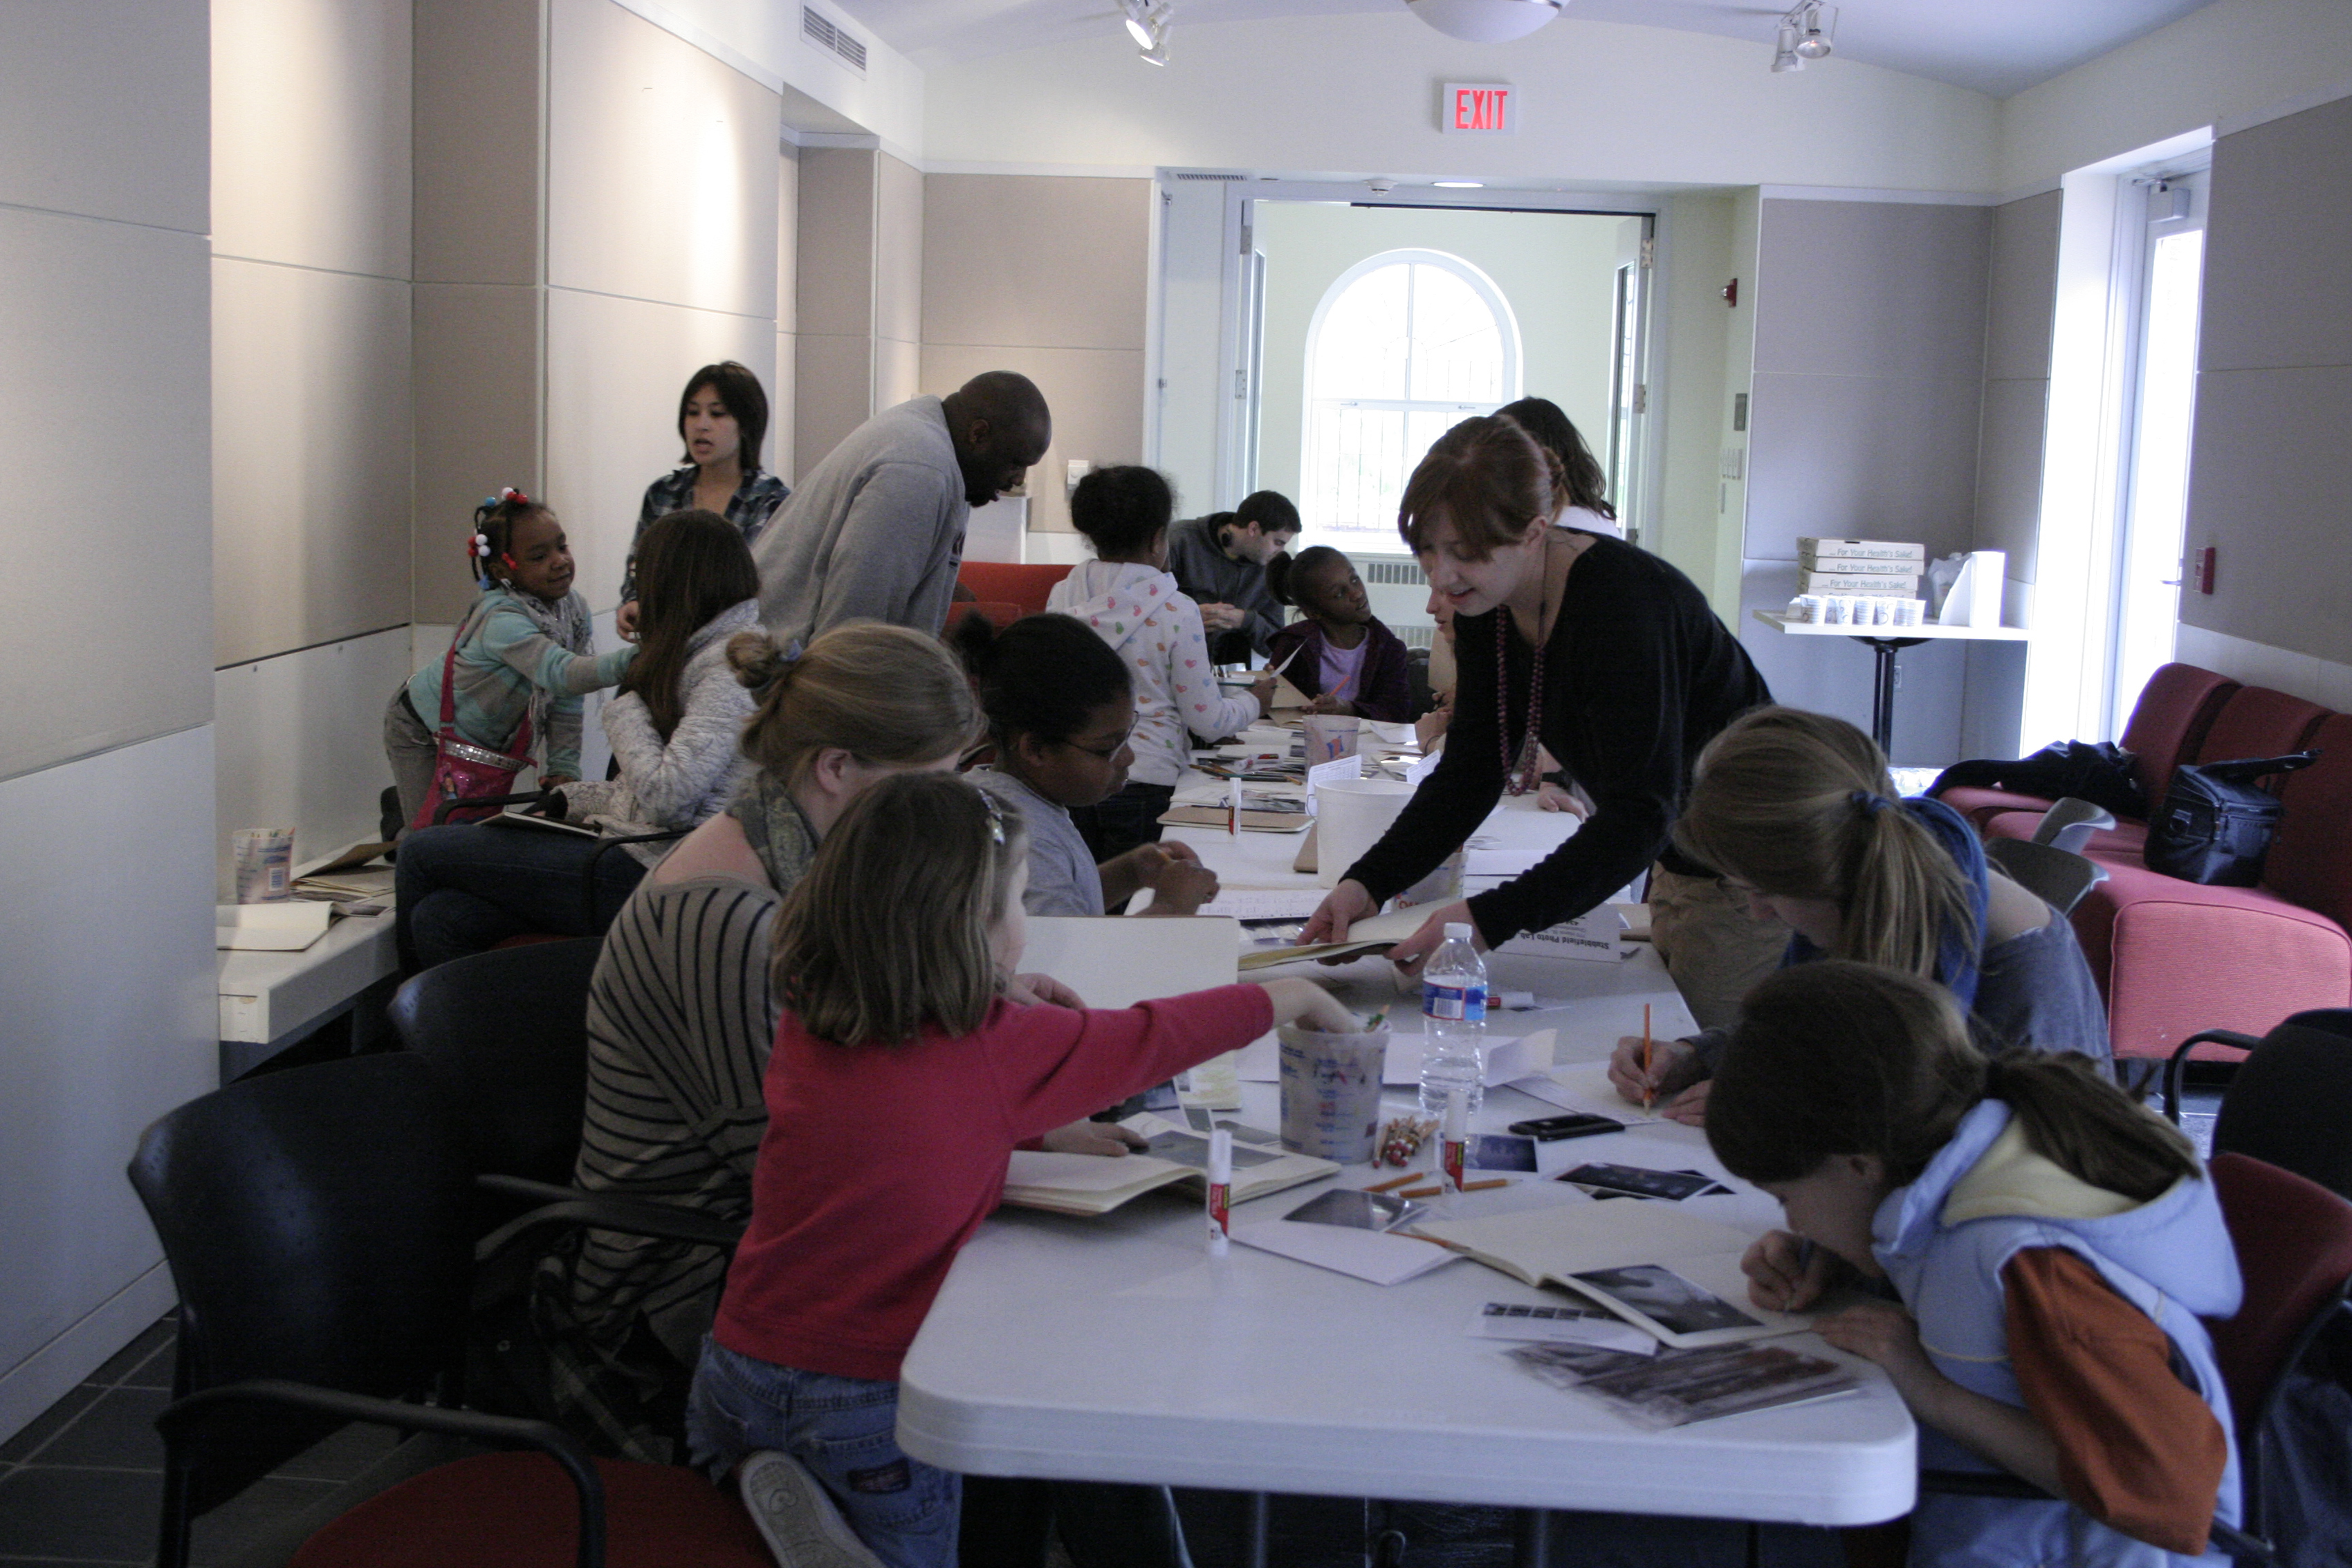 UVA students work with elementary kids at tables